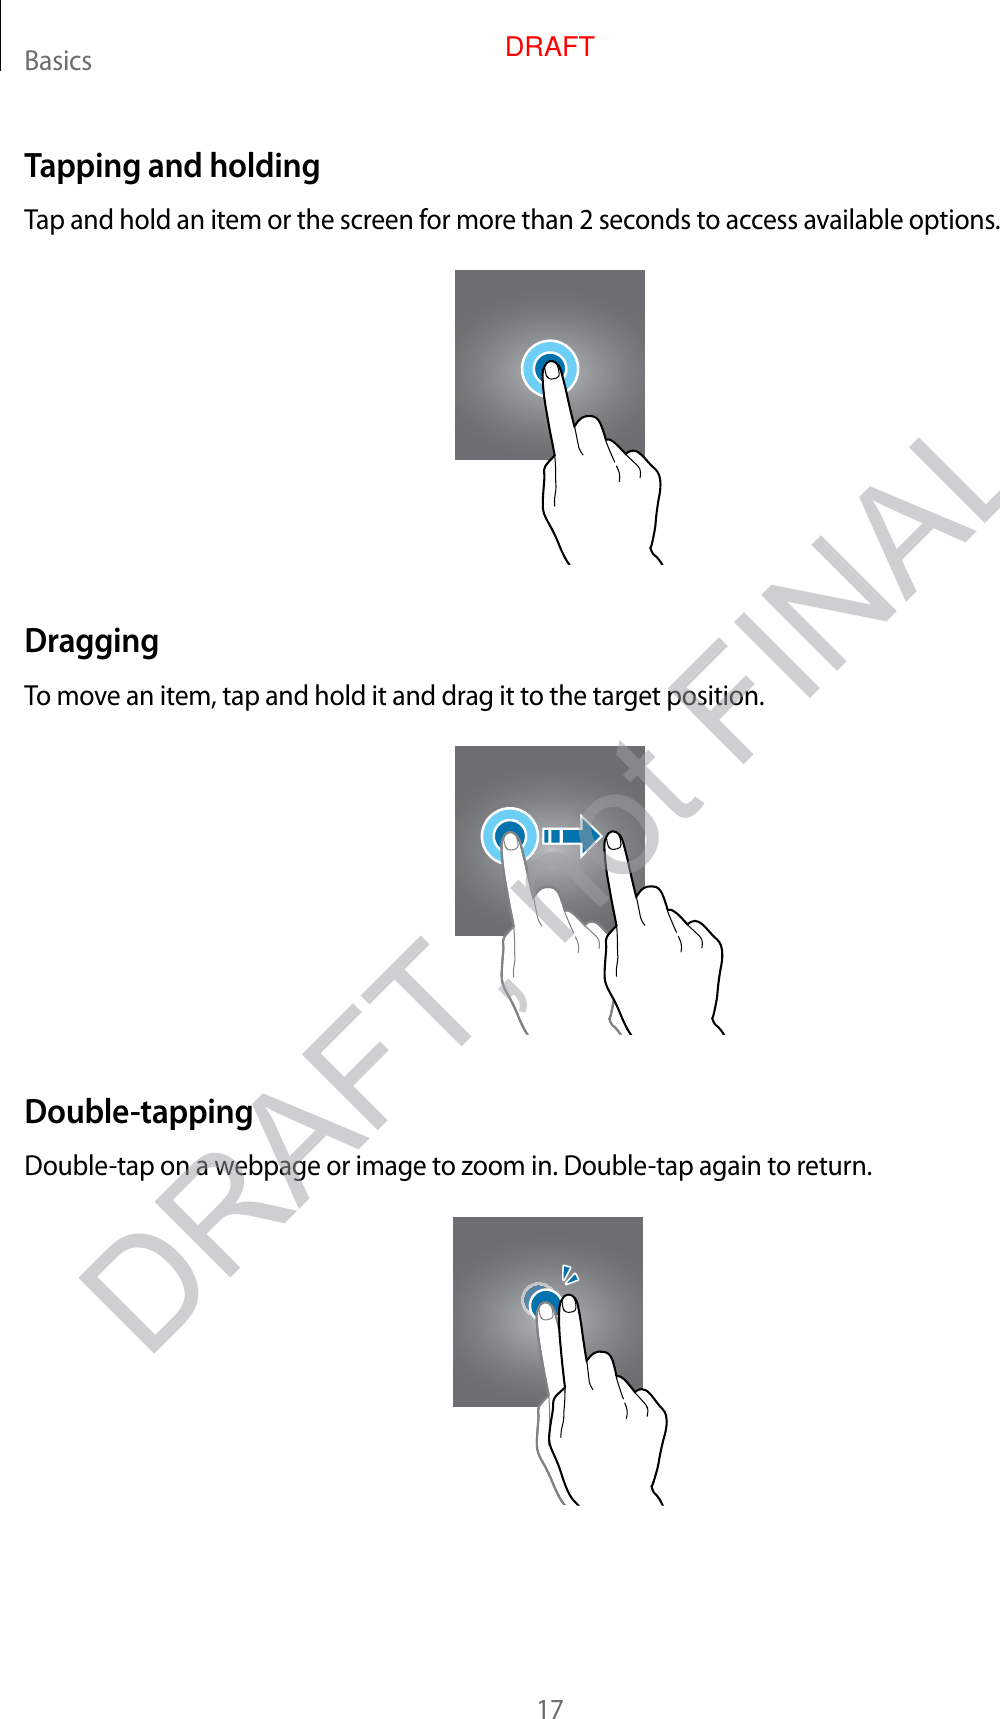 Basics17Tapping and holdingTap and hold an item or the screen for more than 2 seconds to access available options.DraggingTo move an item, tap and hold it and drag it to the target position.Double-tappingDouble-tap on a webpage or image to zoom in. Double-tap again to return.DRAFT, not FINALDRAFT